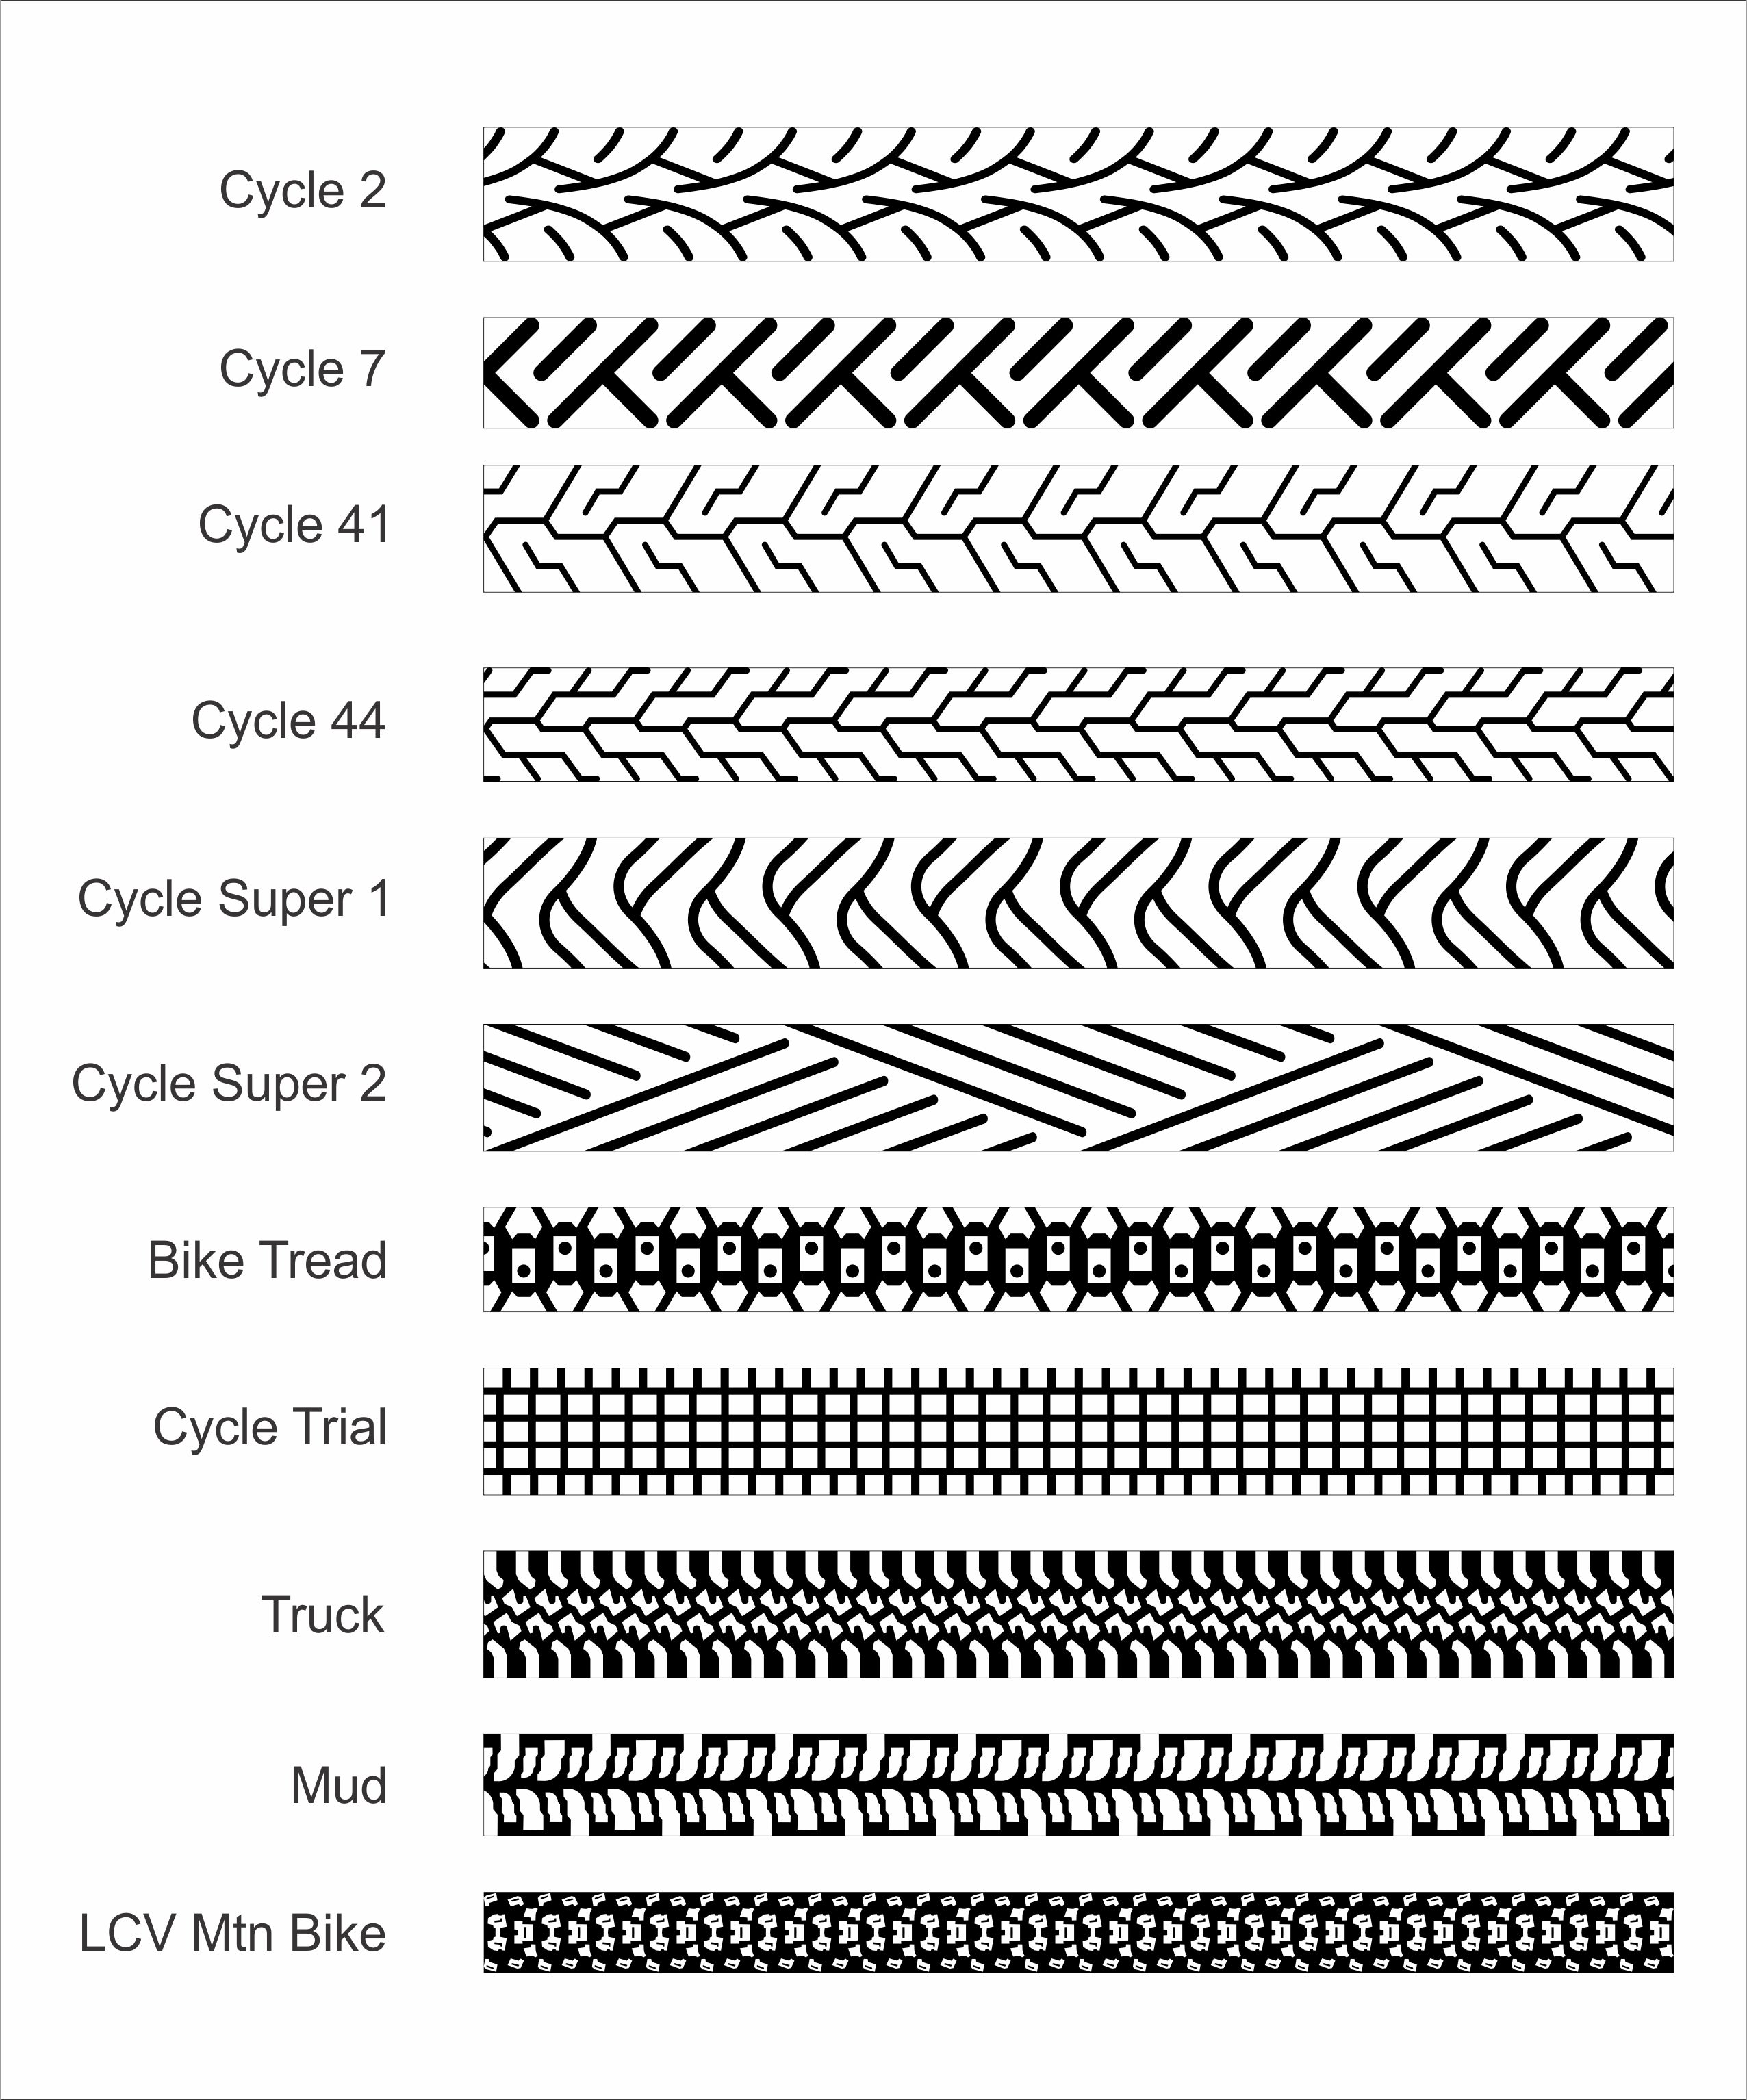 Tire Tread Patterns for Men's Wedding Bands